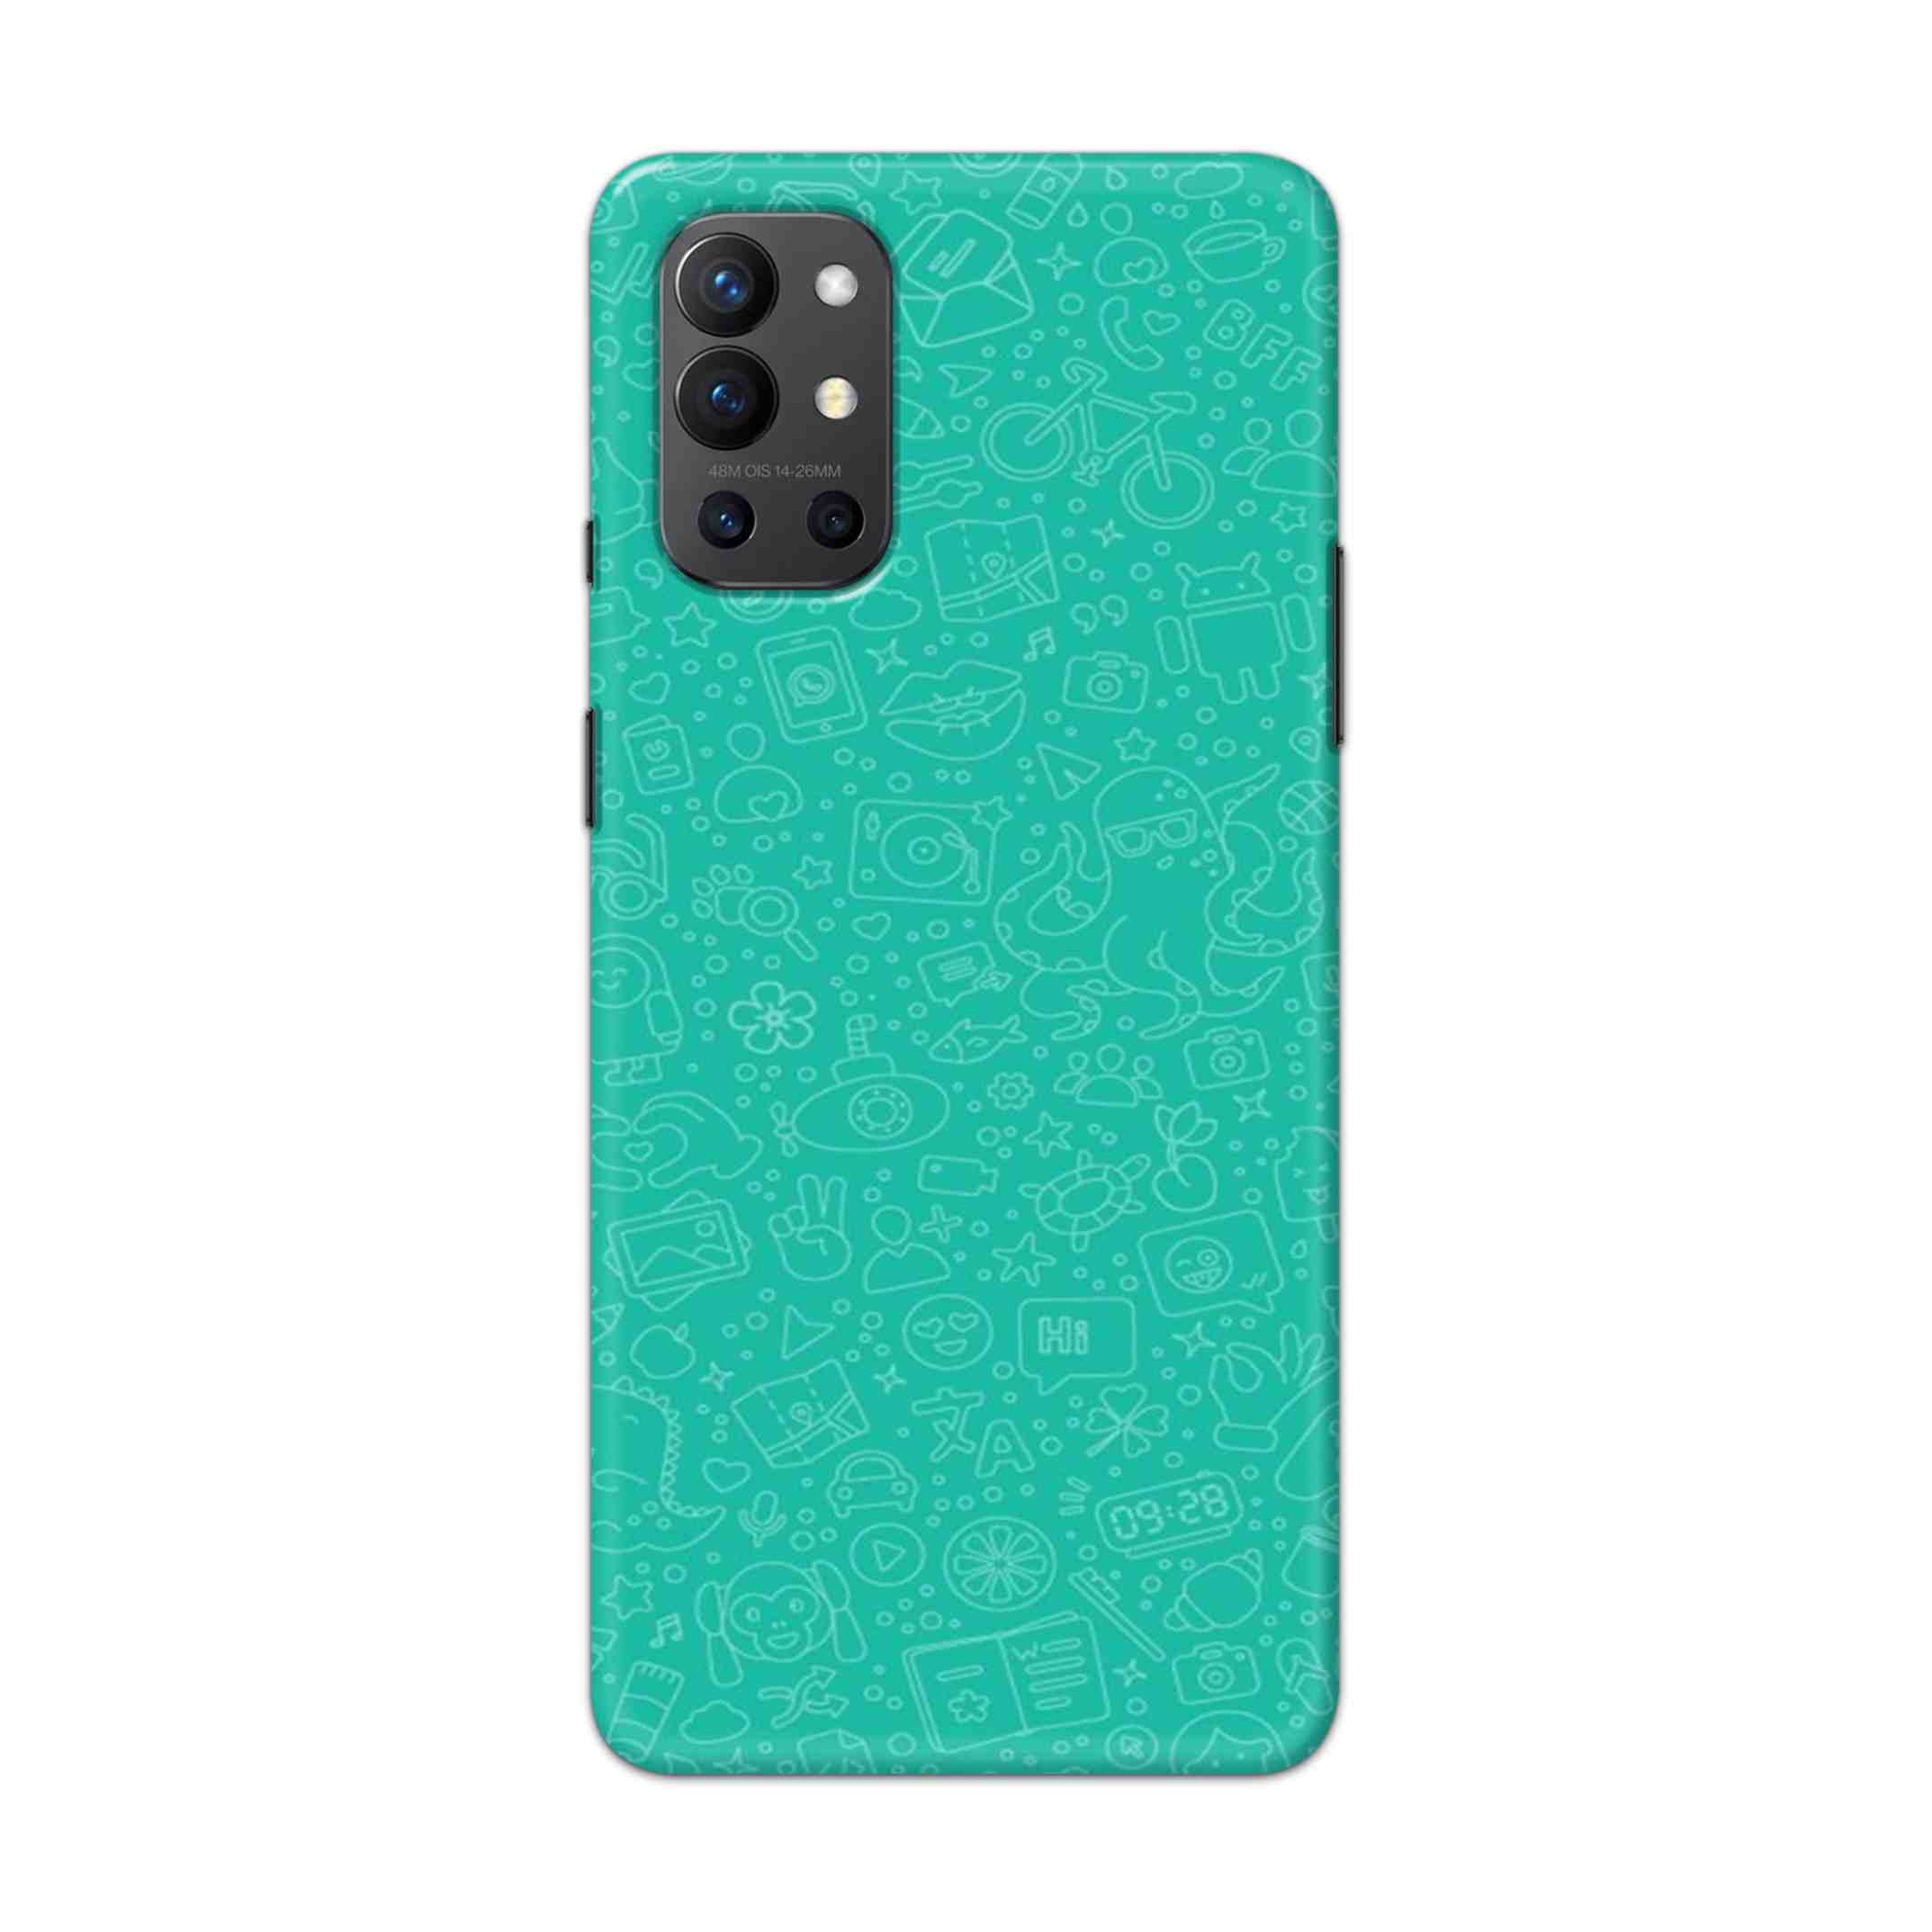 Buy Whatsapp Hard Back Mobile Phone Case Cover For OnePlus 9R / 8T Online